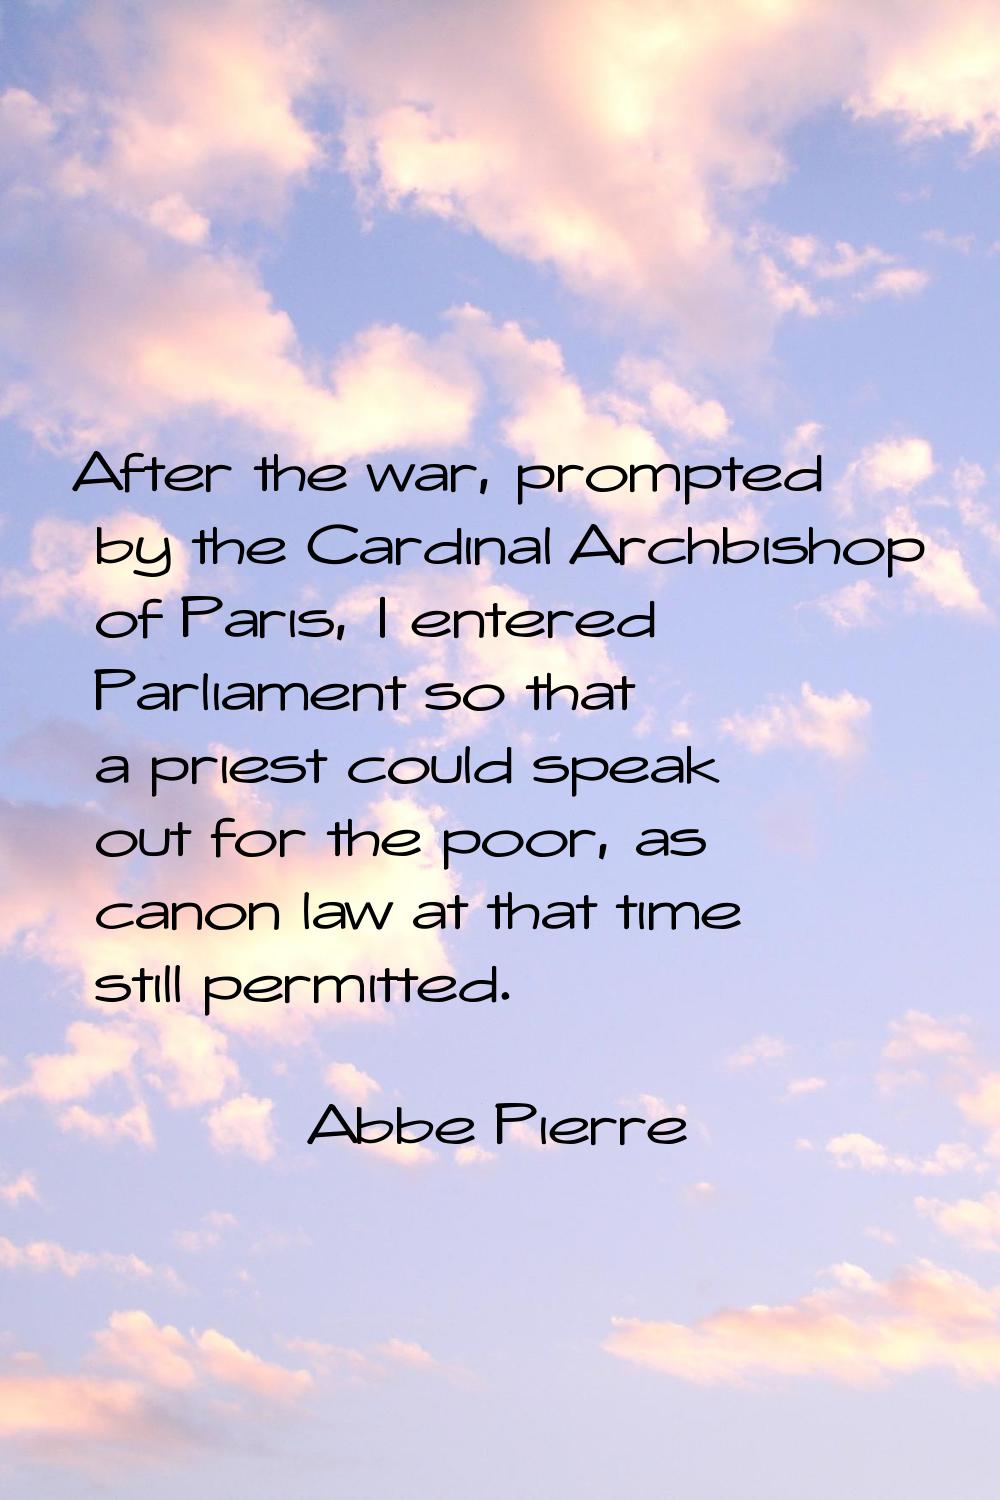 After the war, prompted by the Cardinal Archbishop of Paris, I entered Parliament so that a priest 